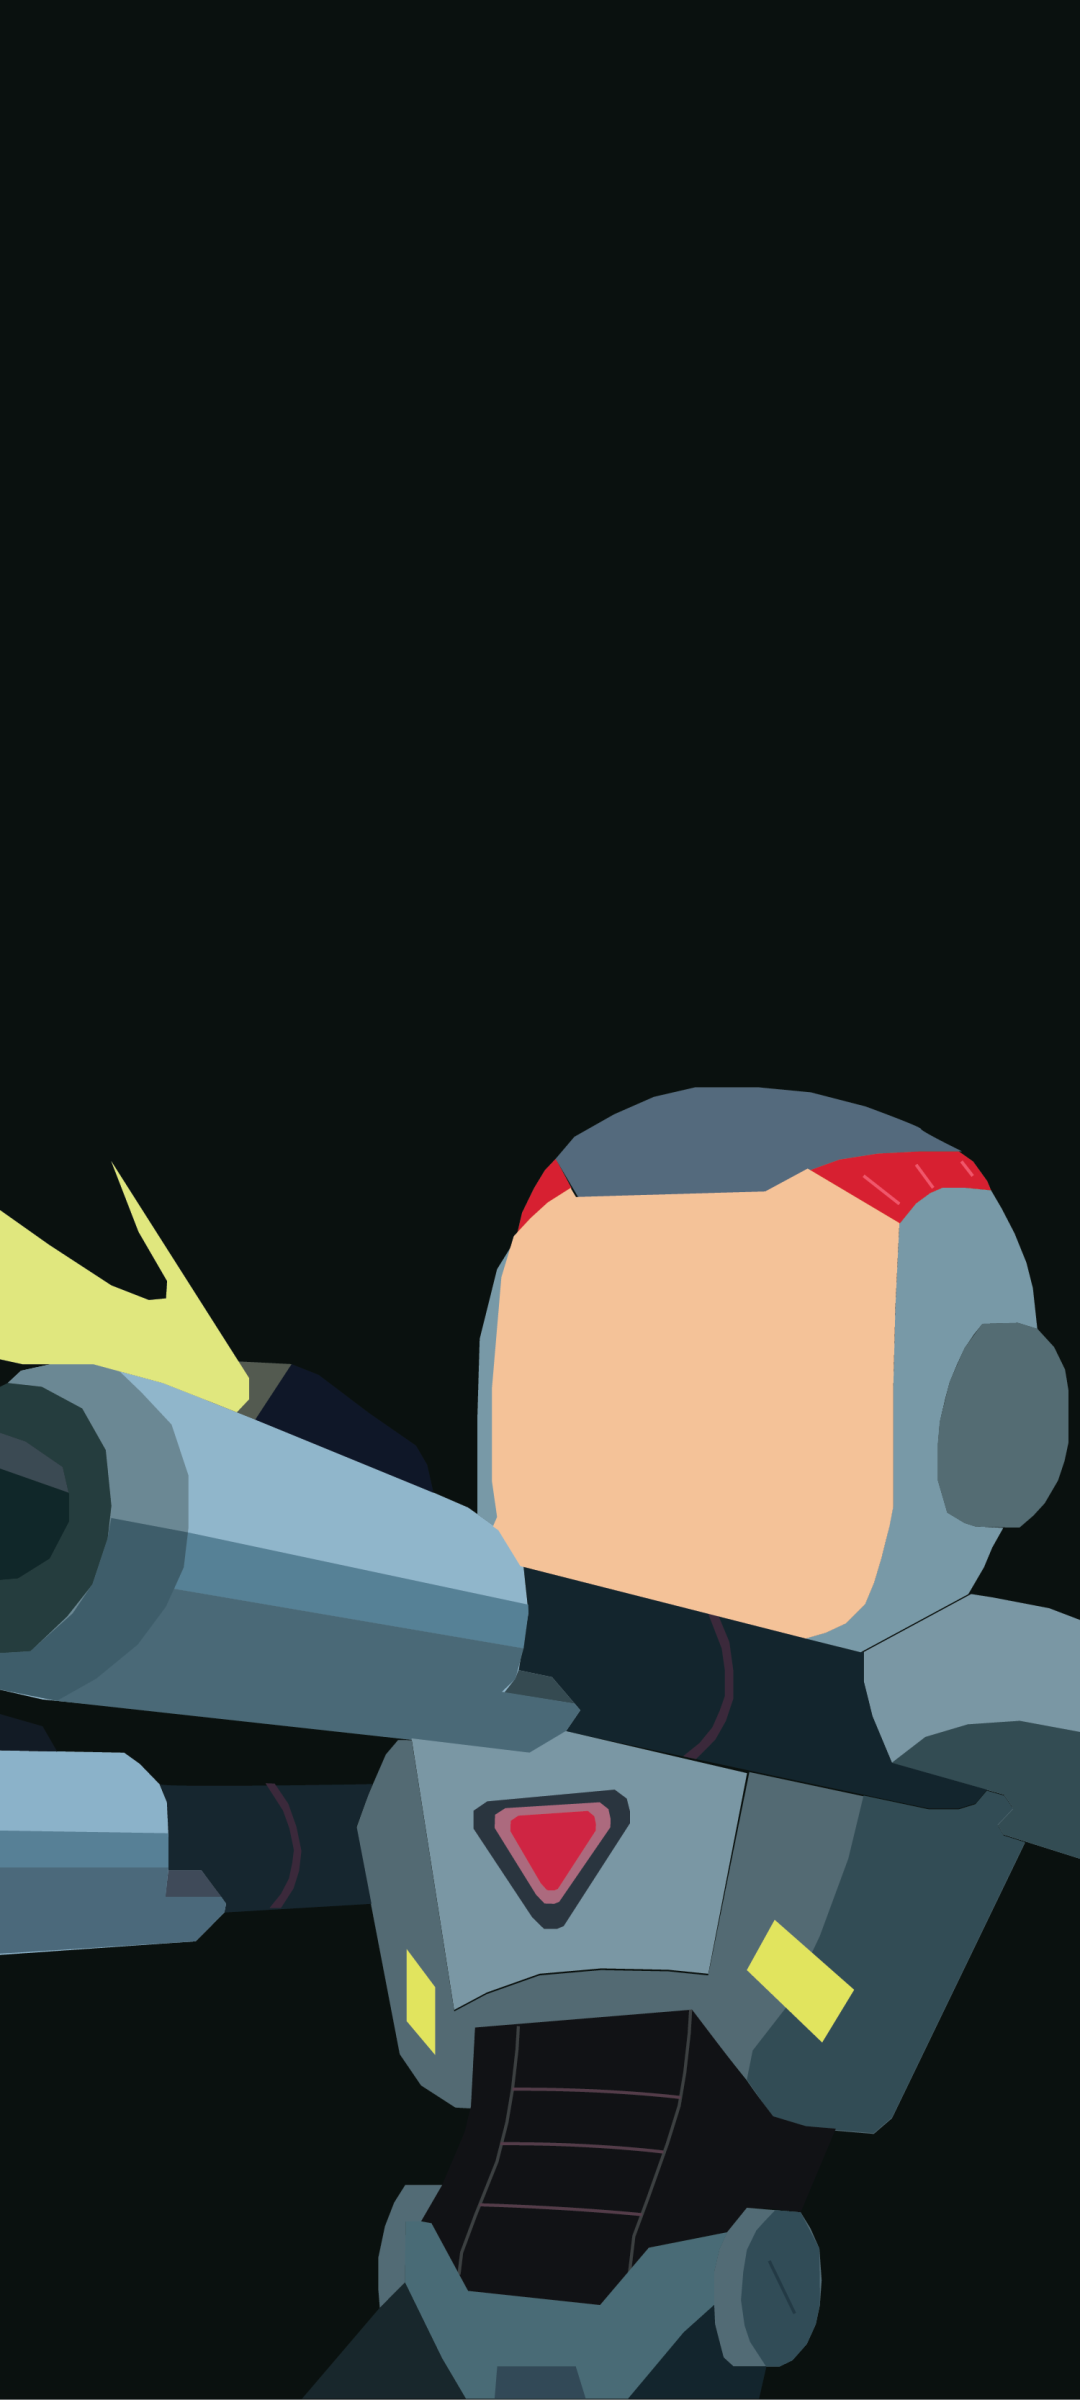 Rick And Morty Minimalist Wallpaper - Badass Morty - Mobile Abyss